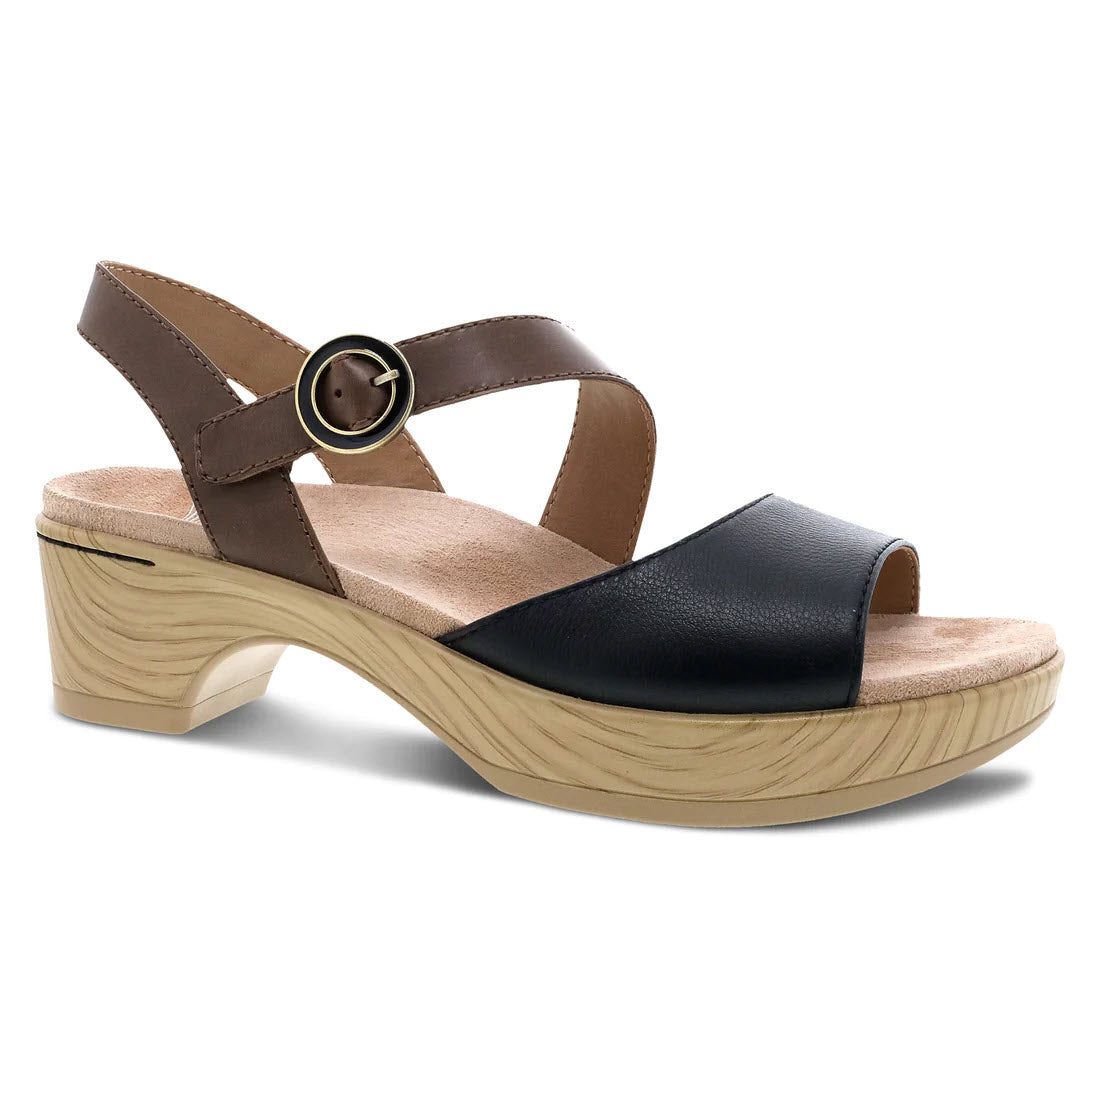 A Dansko women's black nappa leather sandal with asymmetrical black and tan straps, a circular buckle, and a wood-textured platform heel.